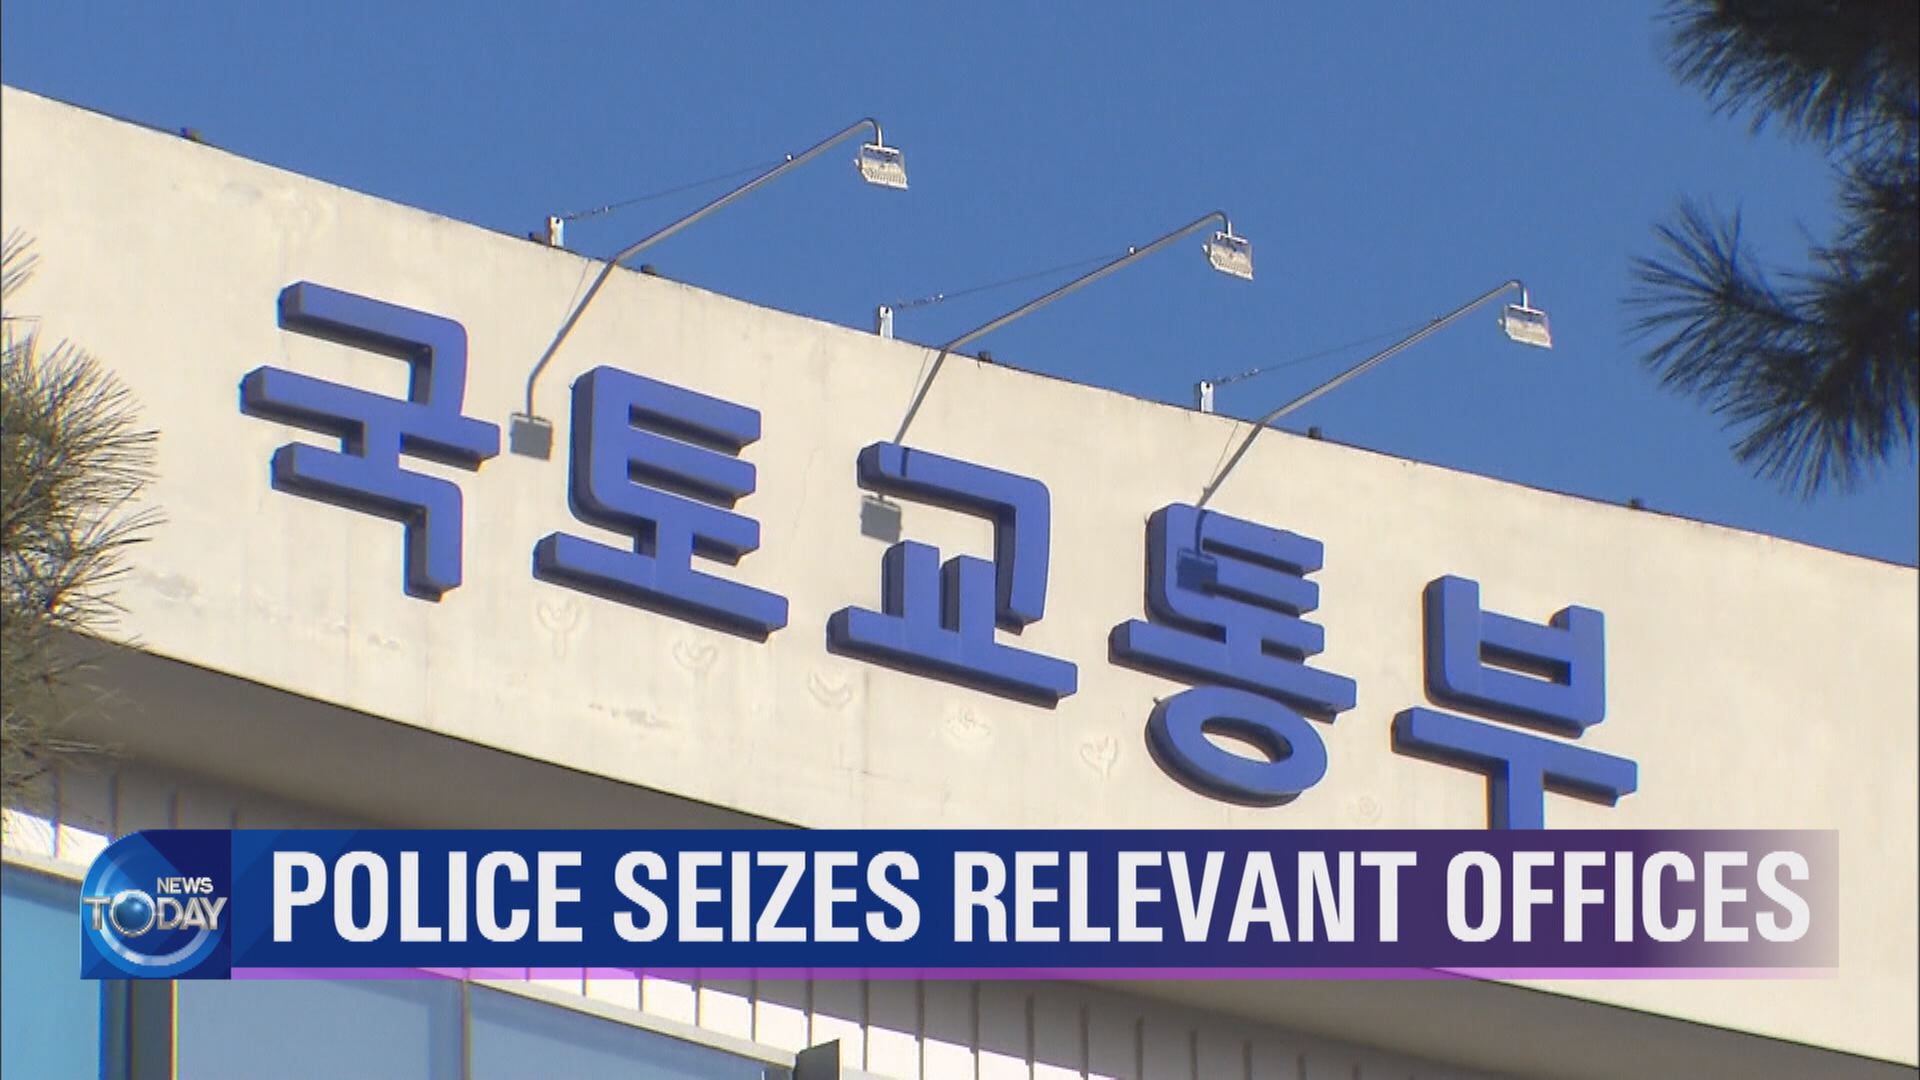 POLICE SEIZES RELEVANT OFFICES